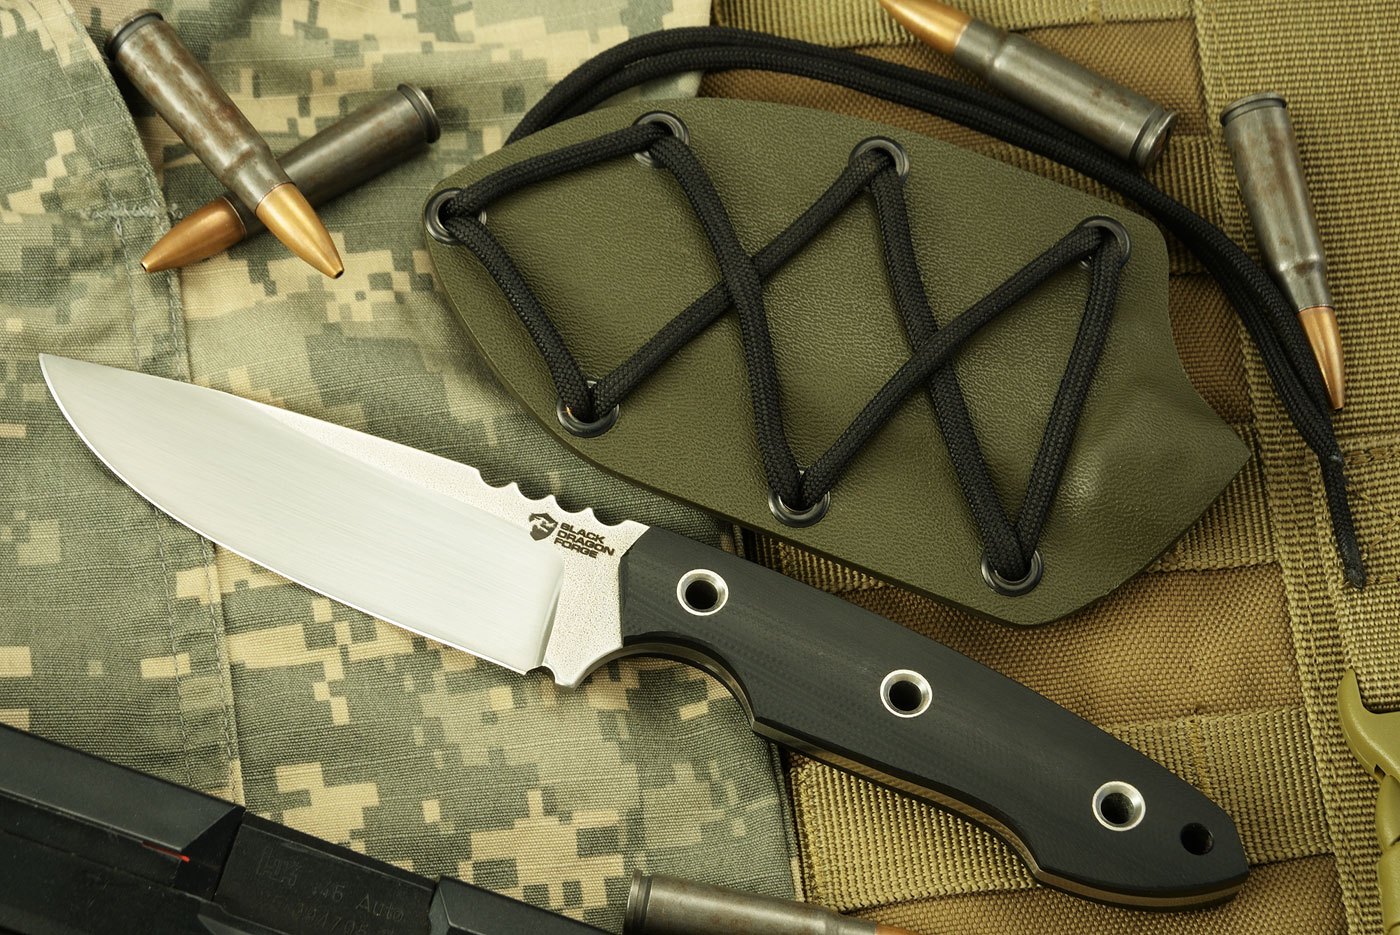 Drop Point Hunter (D-13) with Black G10